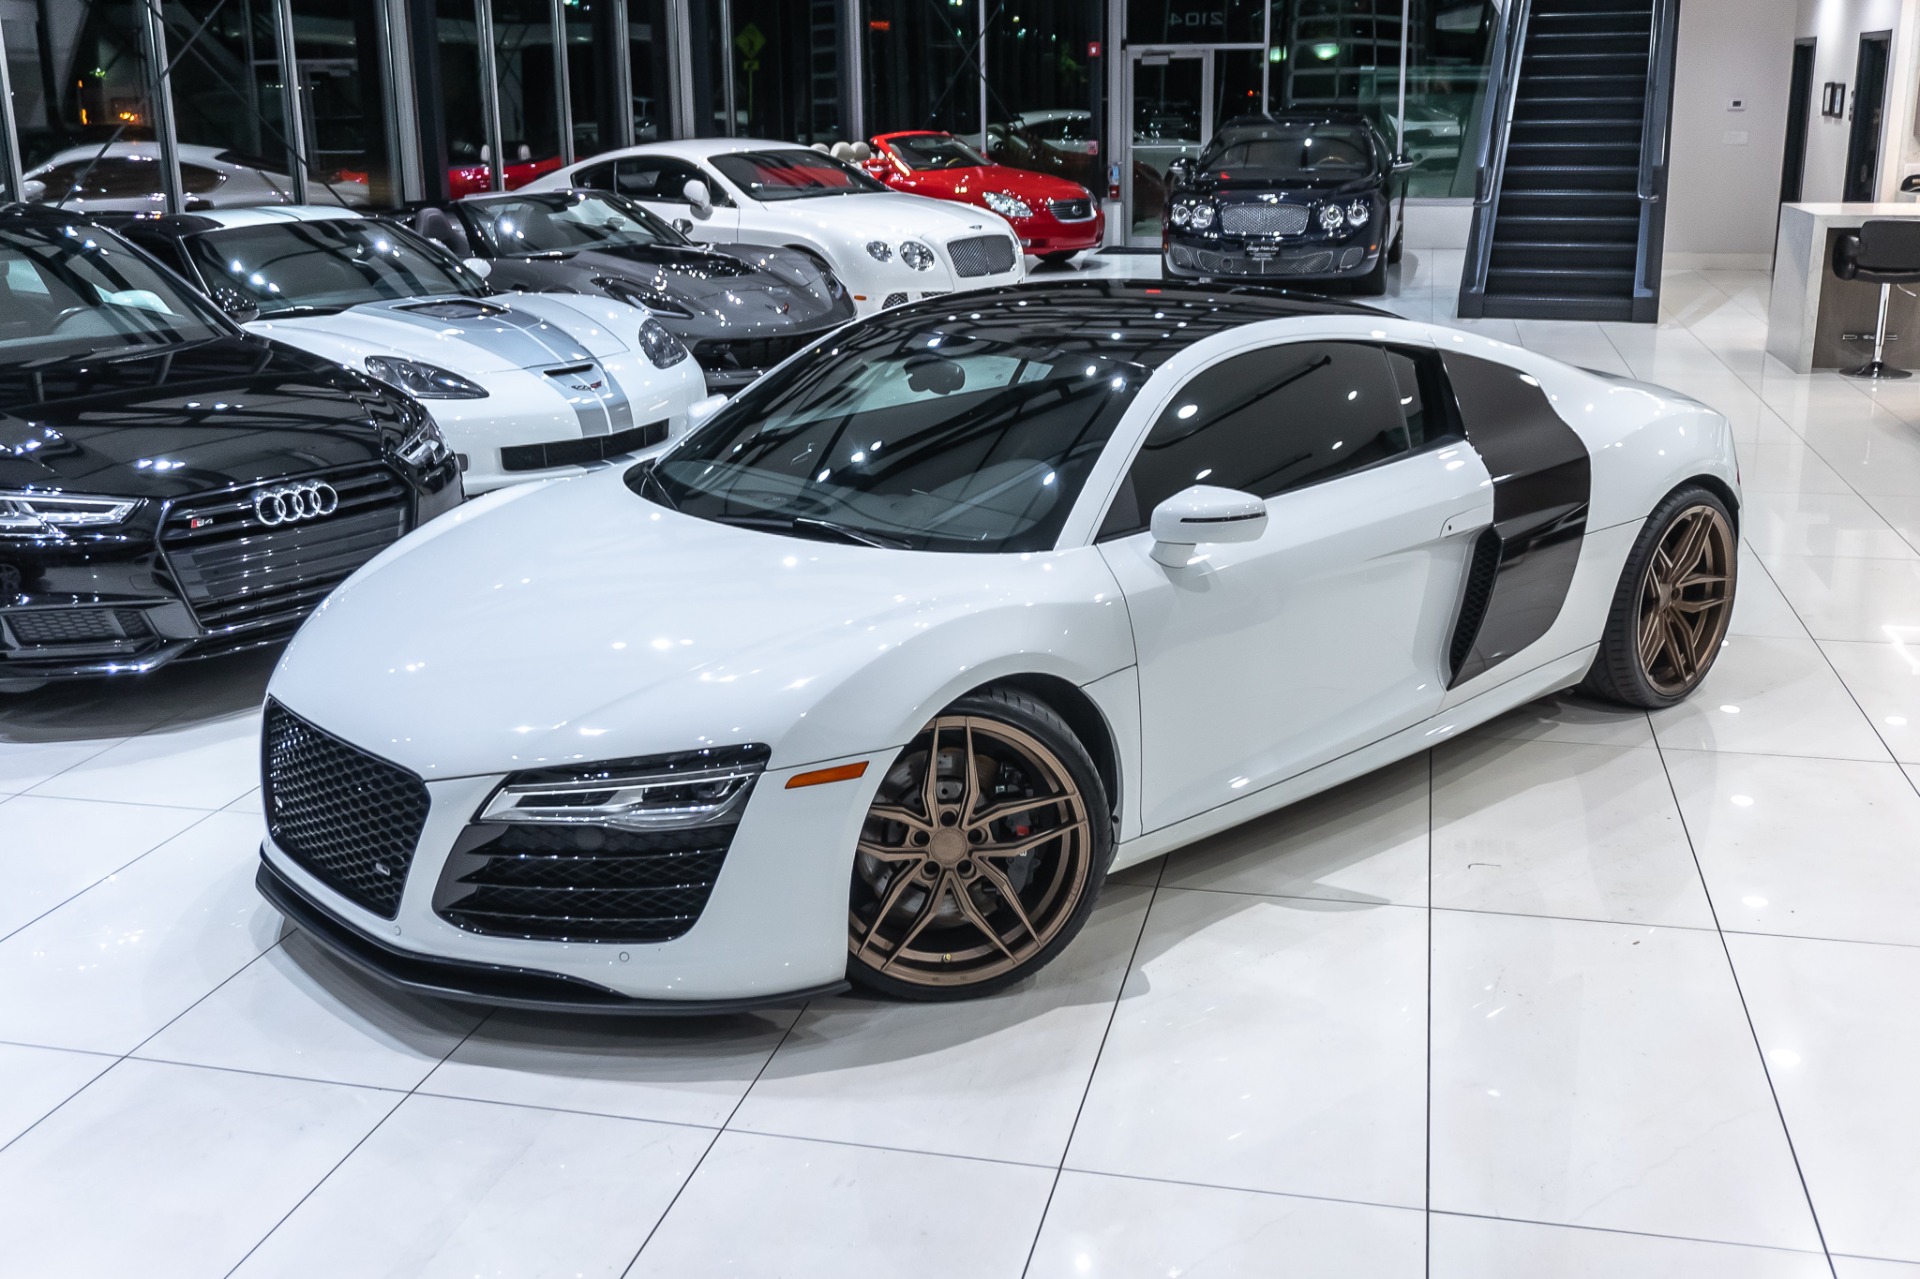 Used-2014-Audi-R8-52-V10-quattro-Coupe-AirLift-Suspension--Armytrix-Exhaust